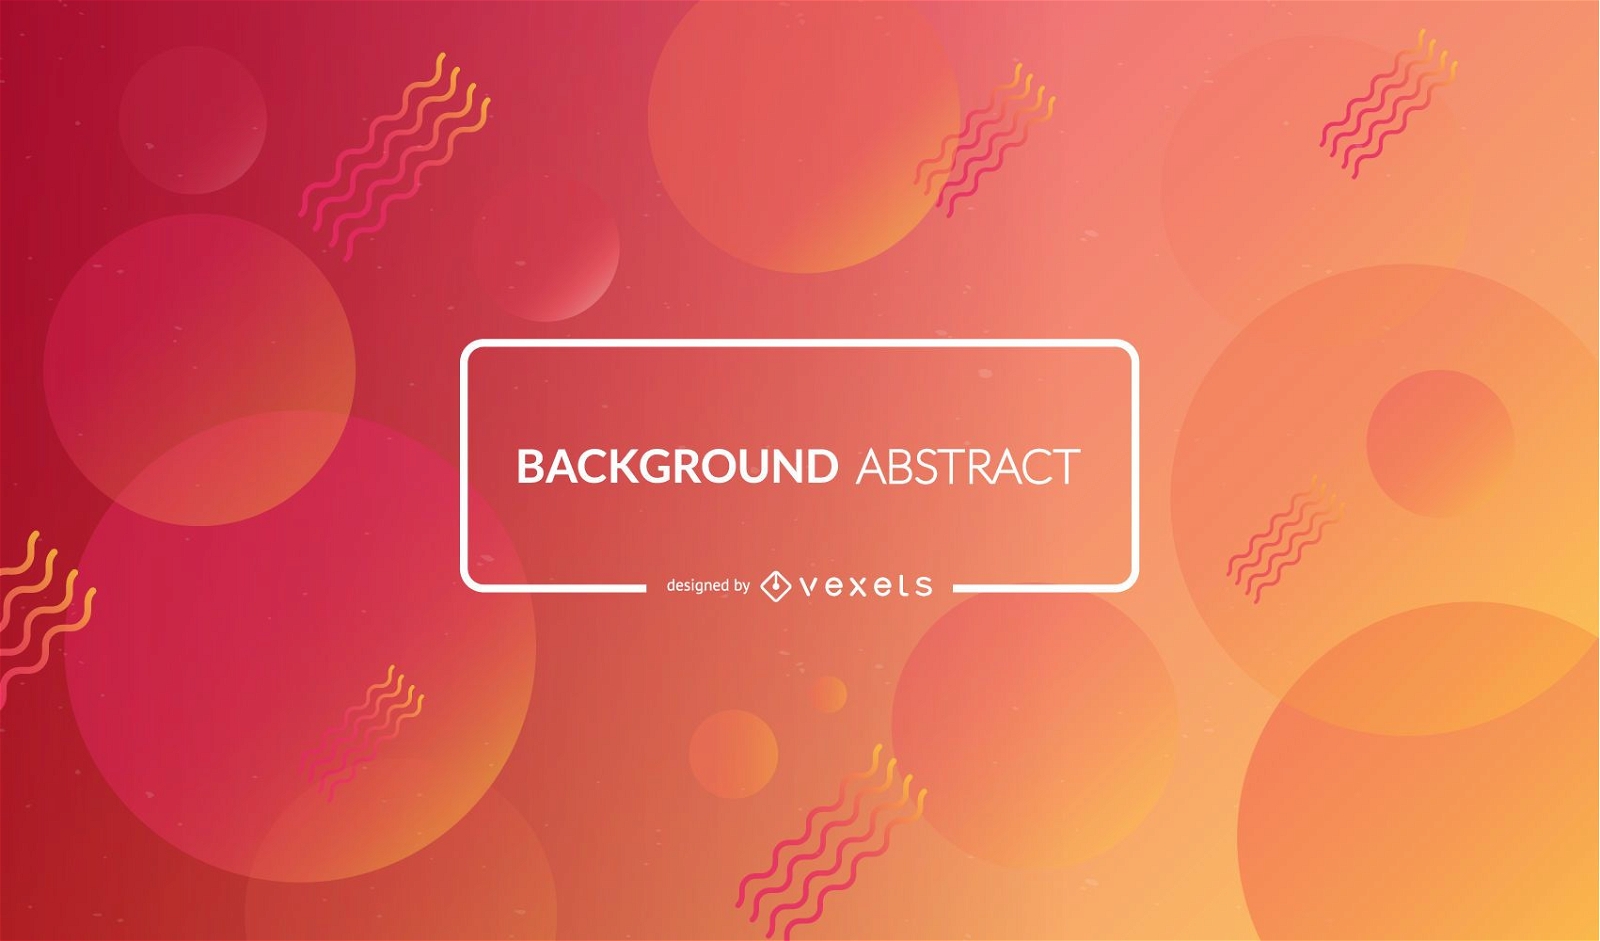 Abstract free vector graphic